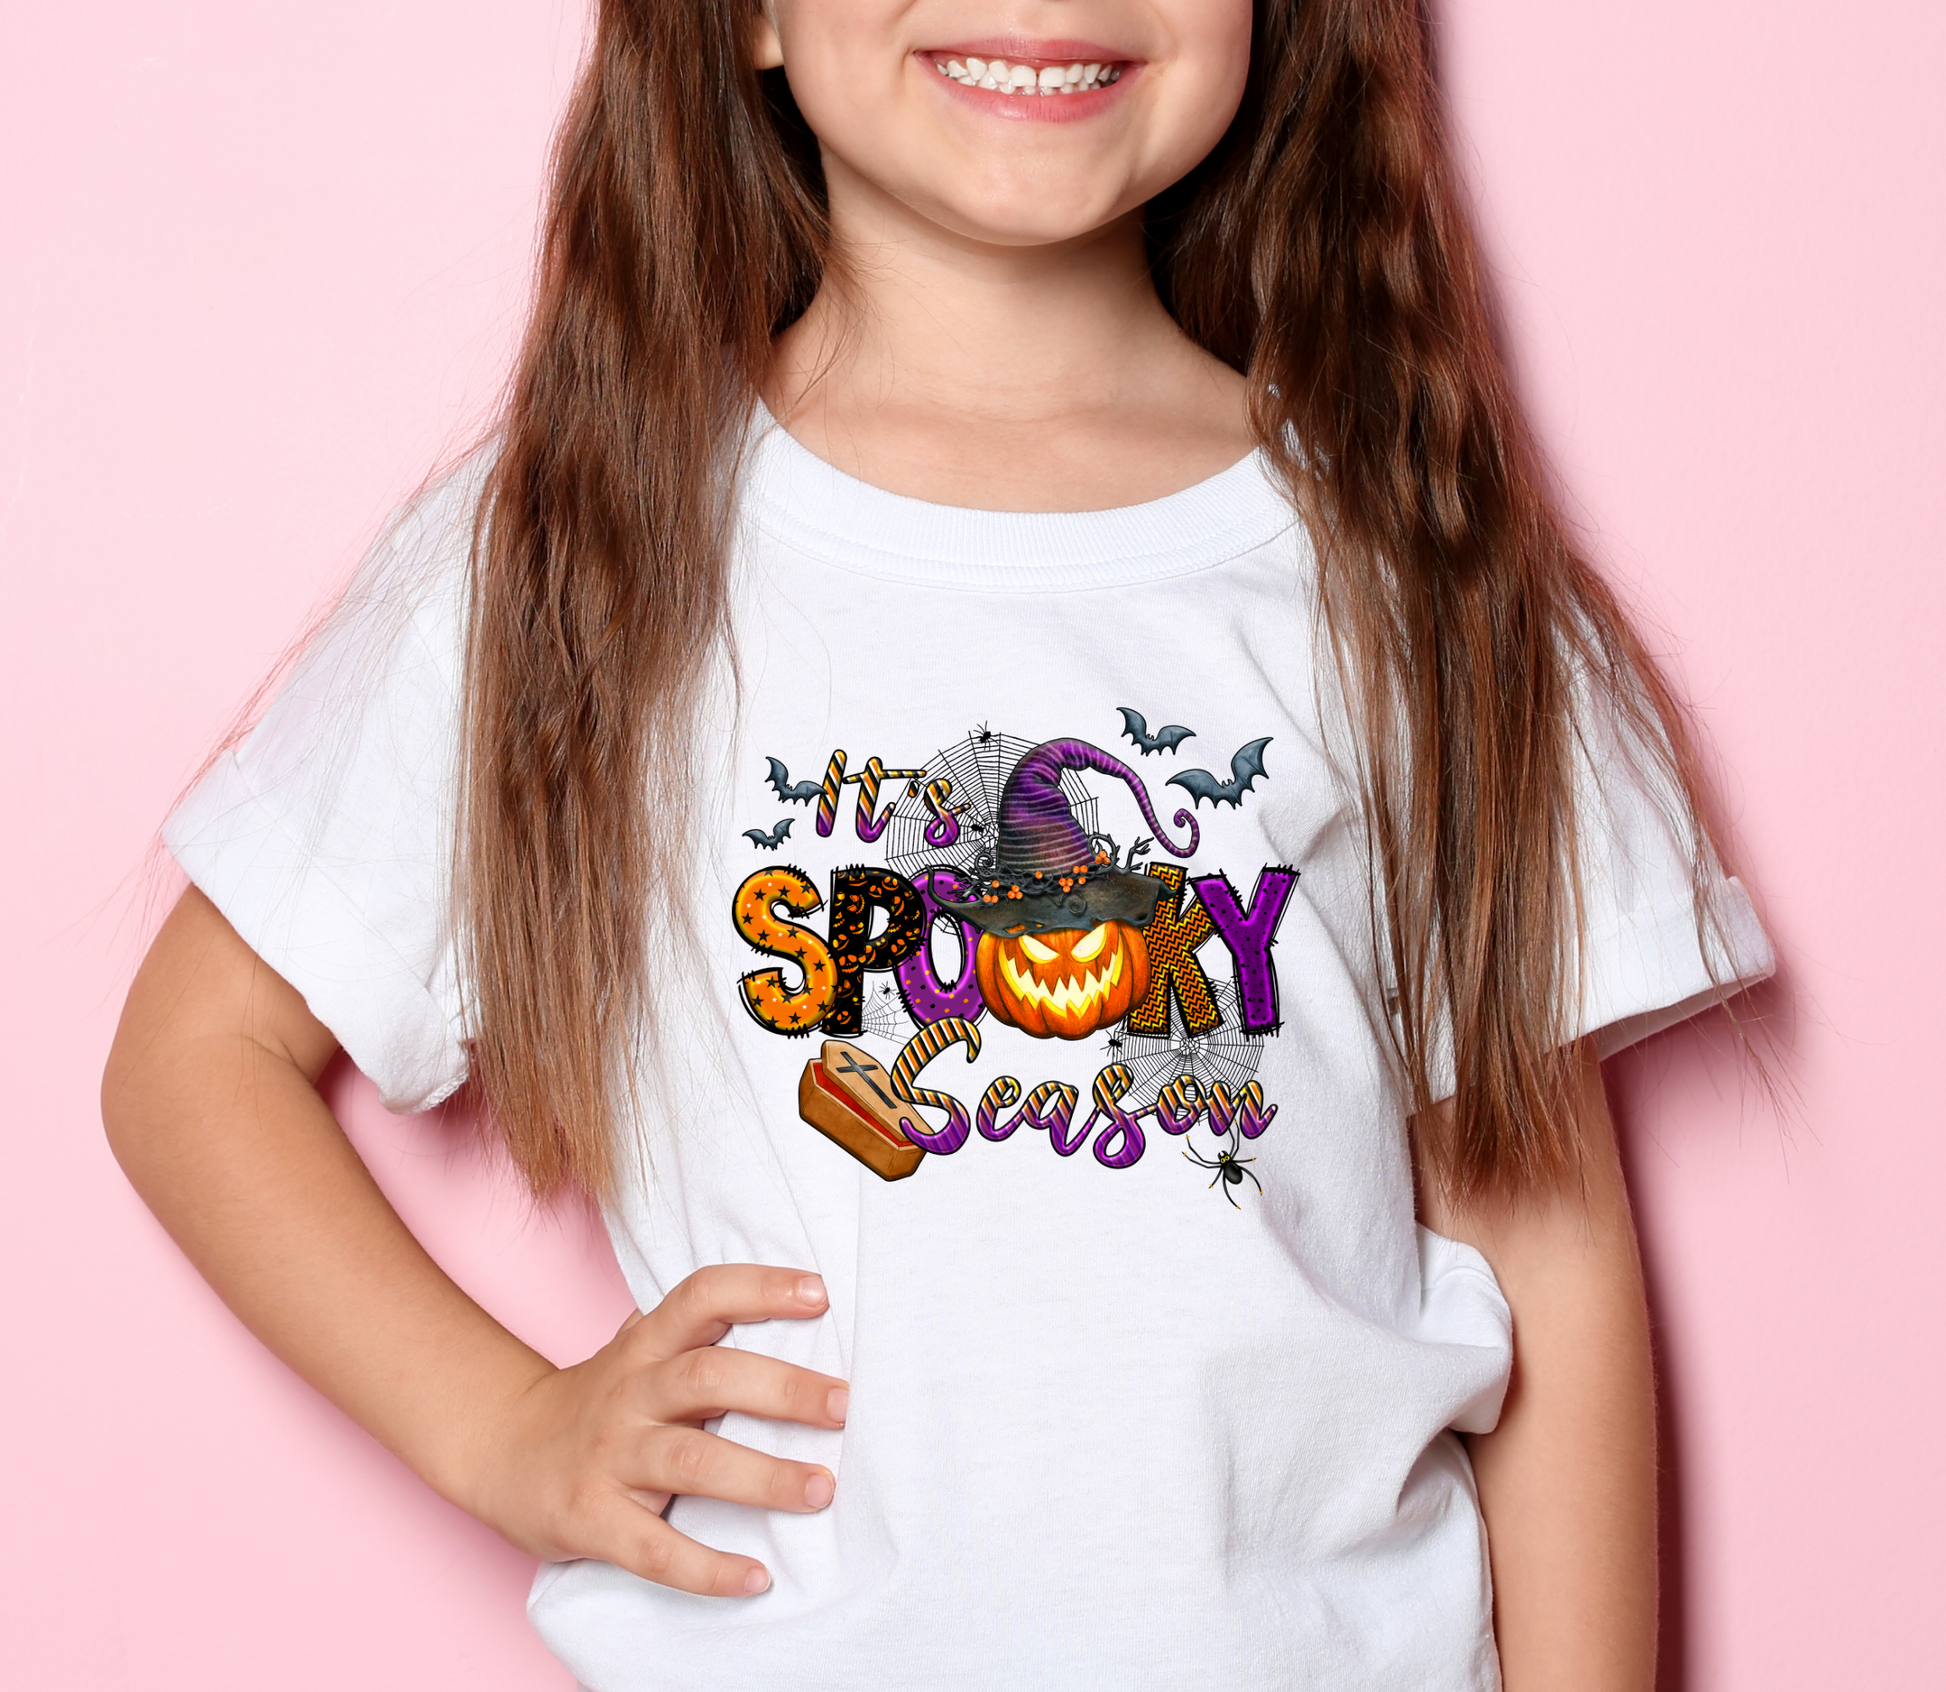 Girl child wearing white shirt with colorful 'Spooky Season' DTF design - LuxuryDTF.com